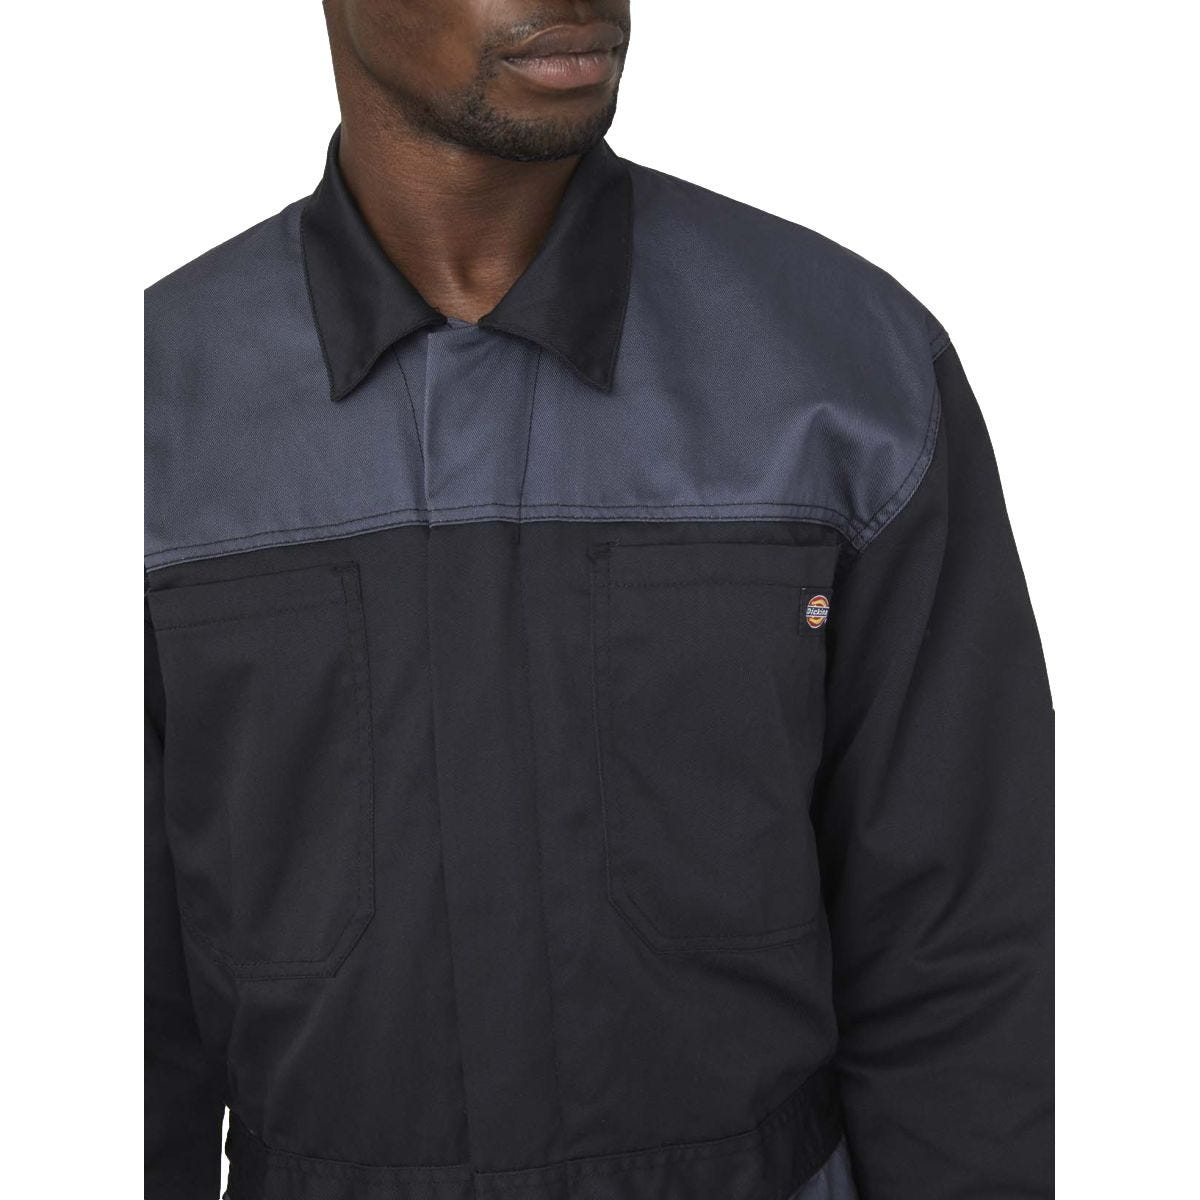 Combinaison Everyday Gris noir - Dickies - Taille S 4